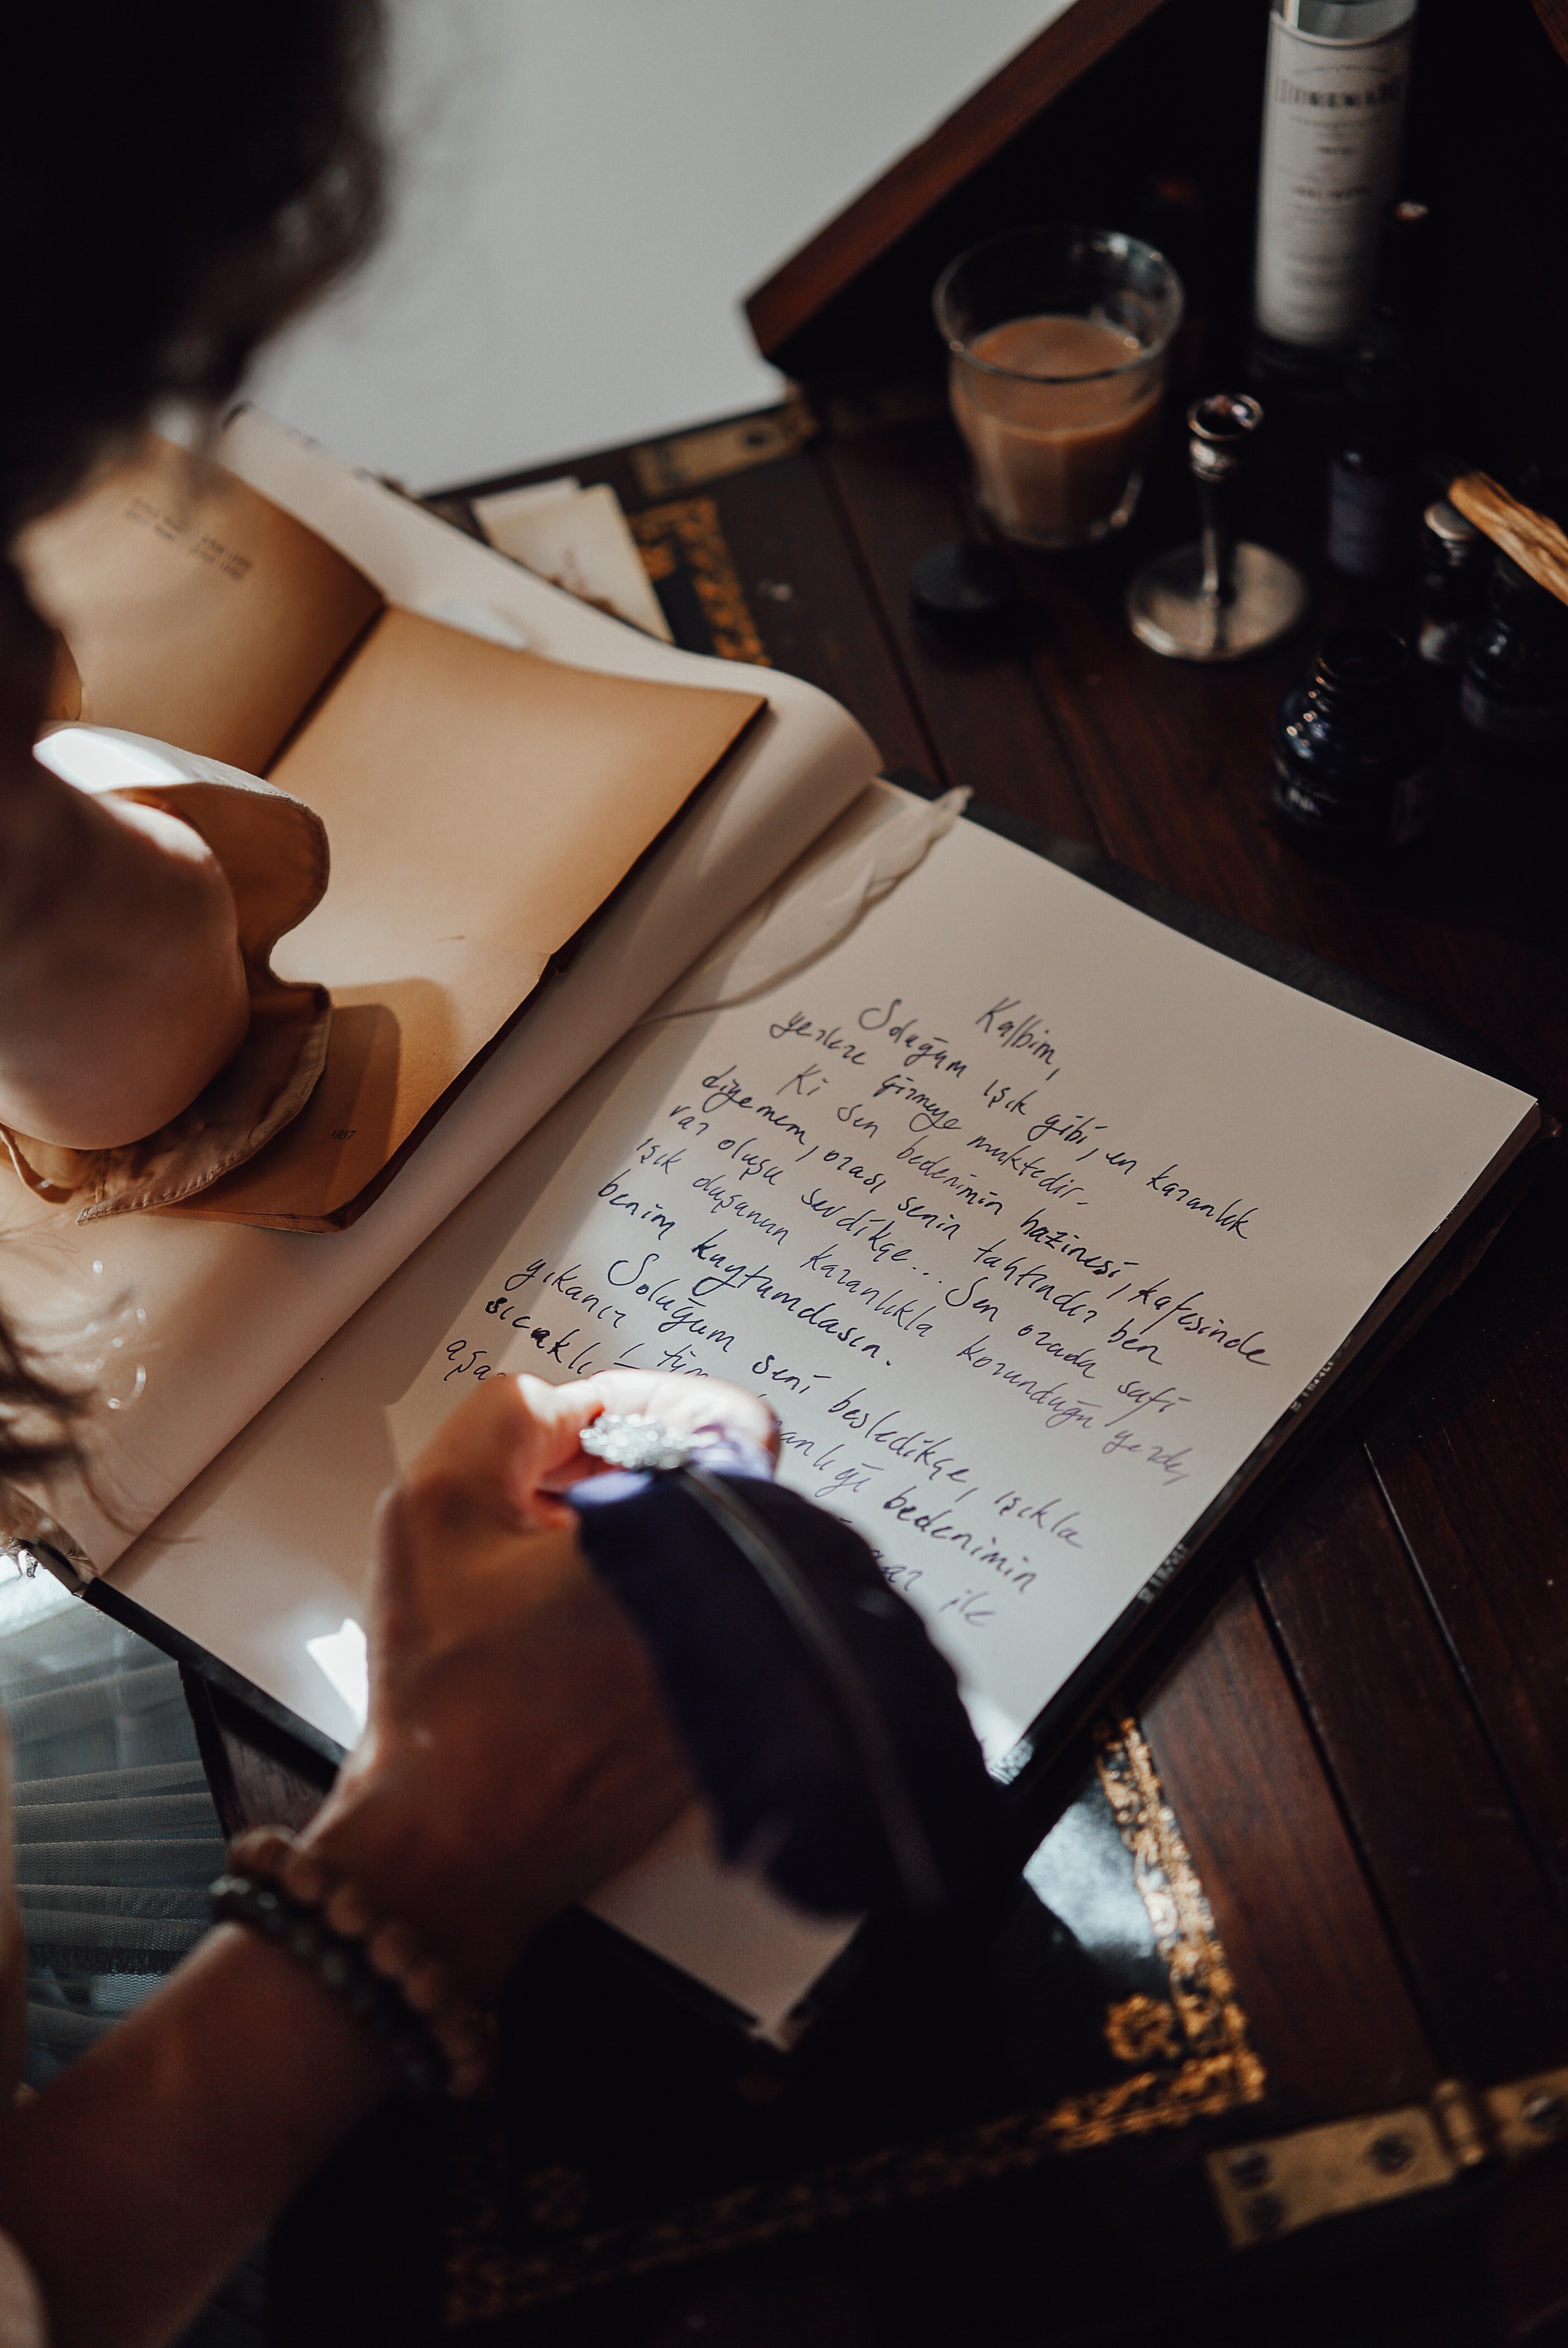 Travis and Scarlett found another letter written by Maggie.  |  Source: Pexels